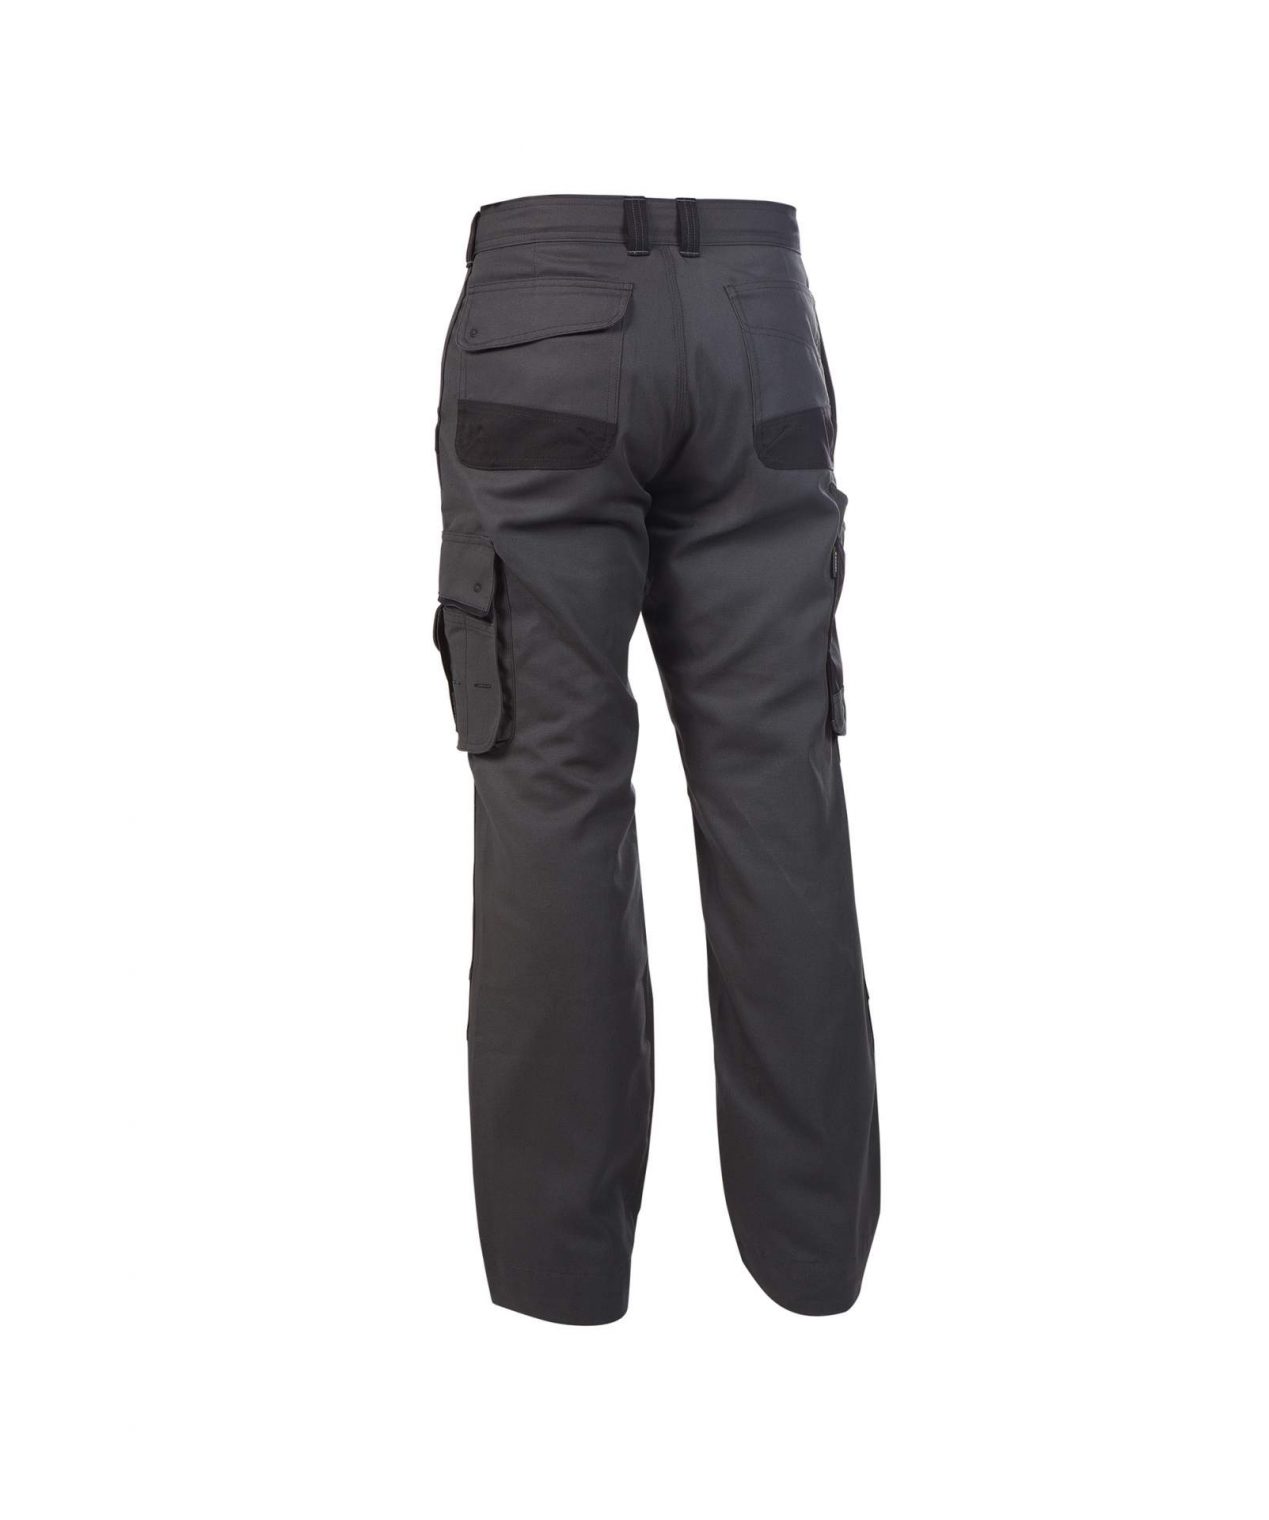 stark canvas work trousers anthracite grey black back